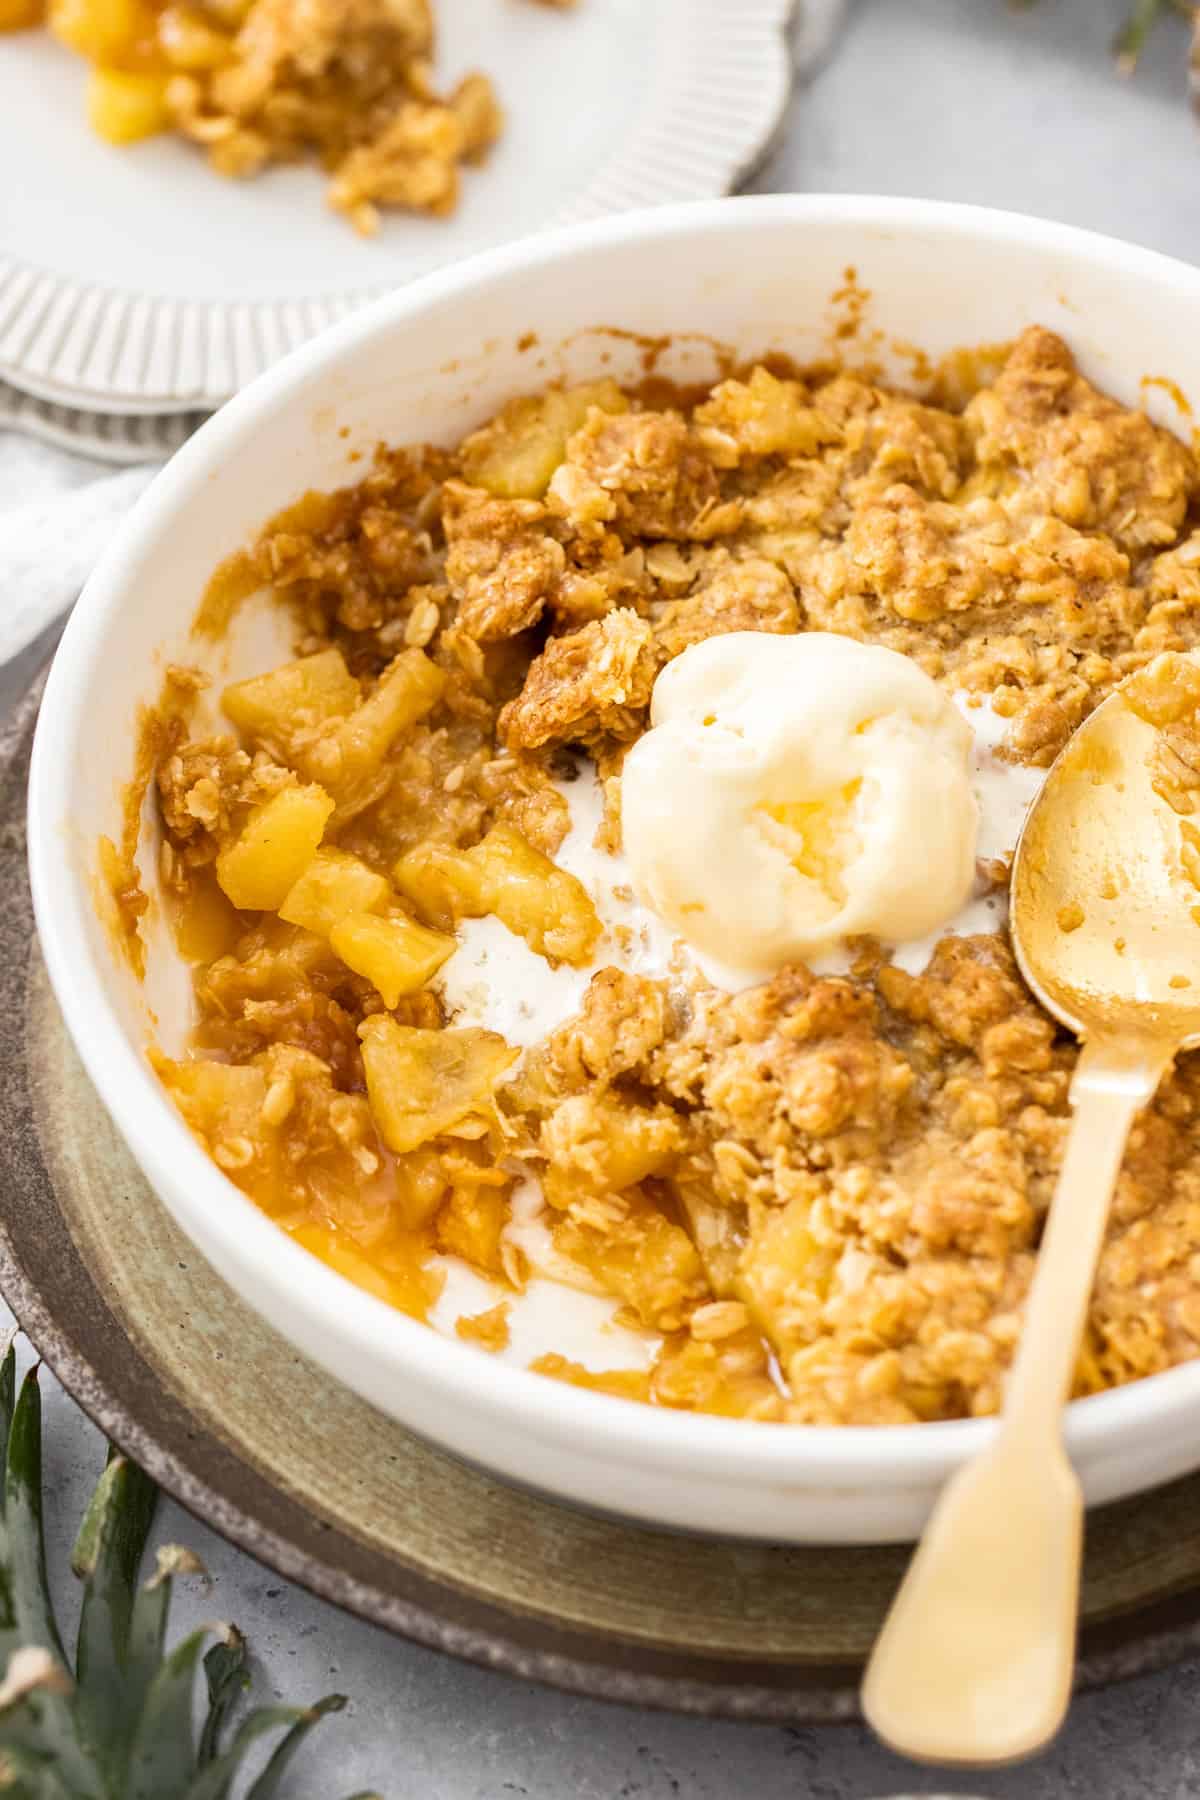 Round white dish of Pineapple Crisp, with a serve missing, a scoop of ice cream in the centre, and a gold spoon in the dish.